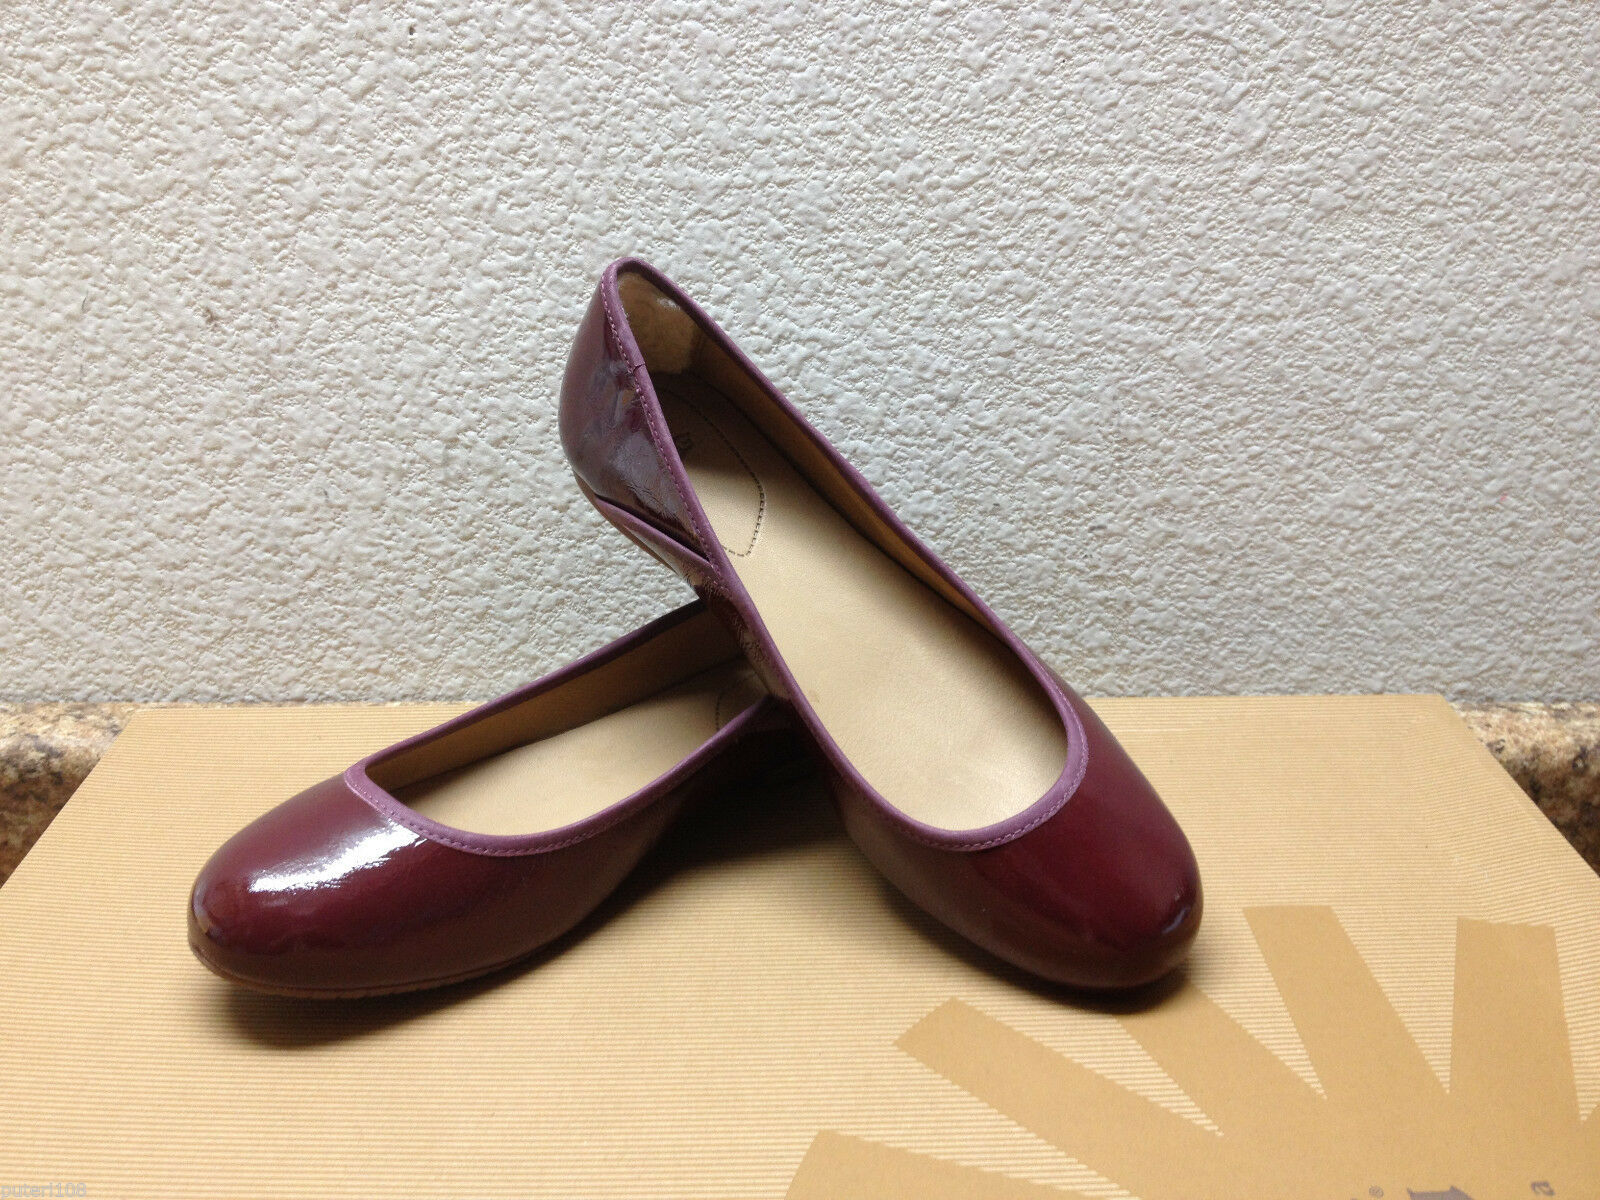 ugg patent leather flats